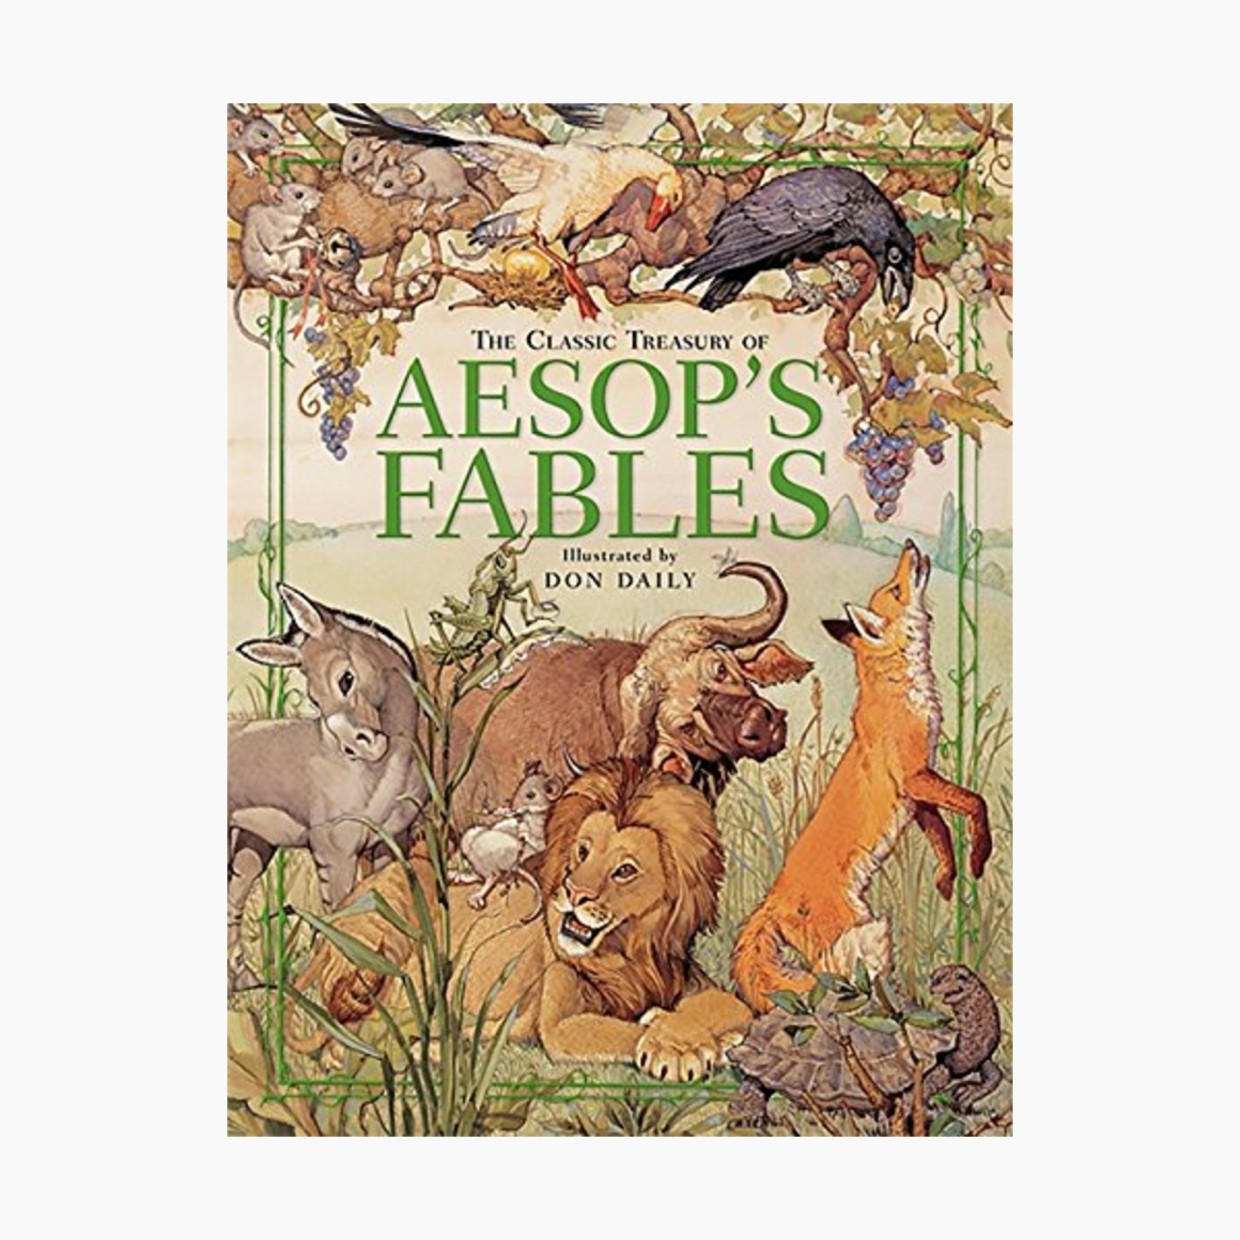 The Classic Treasury of Aesop's Fables.